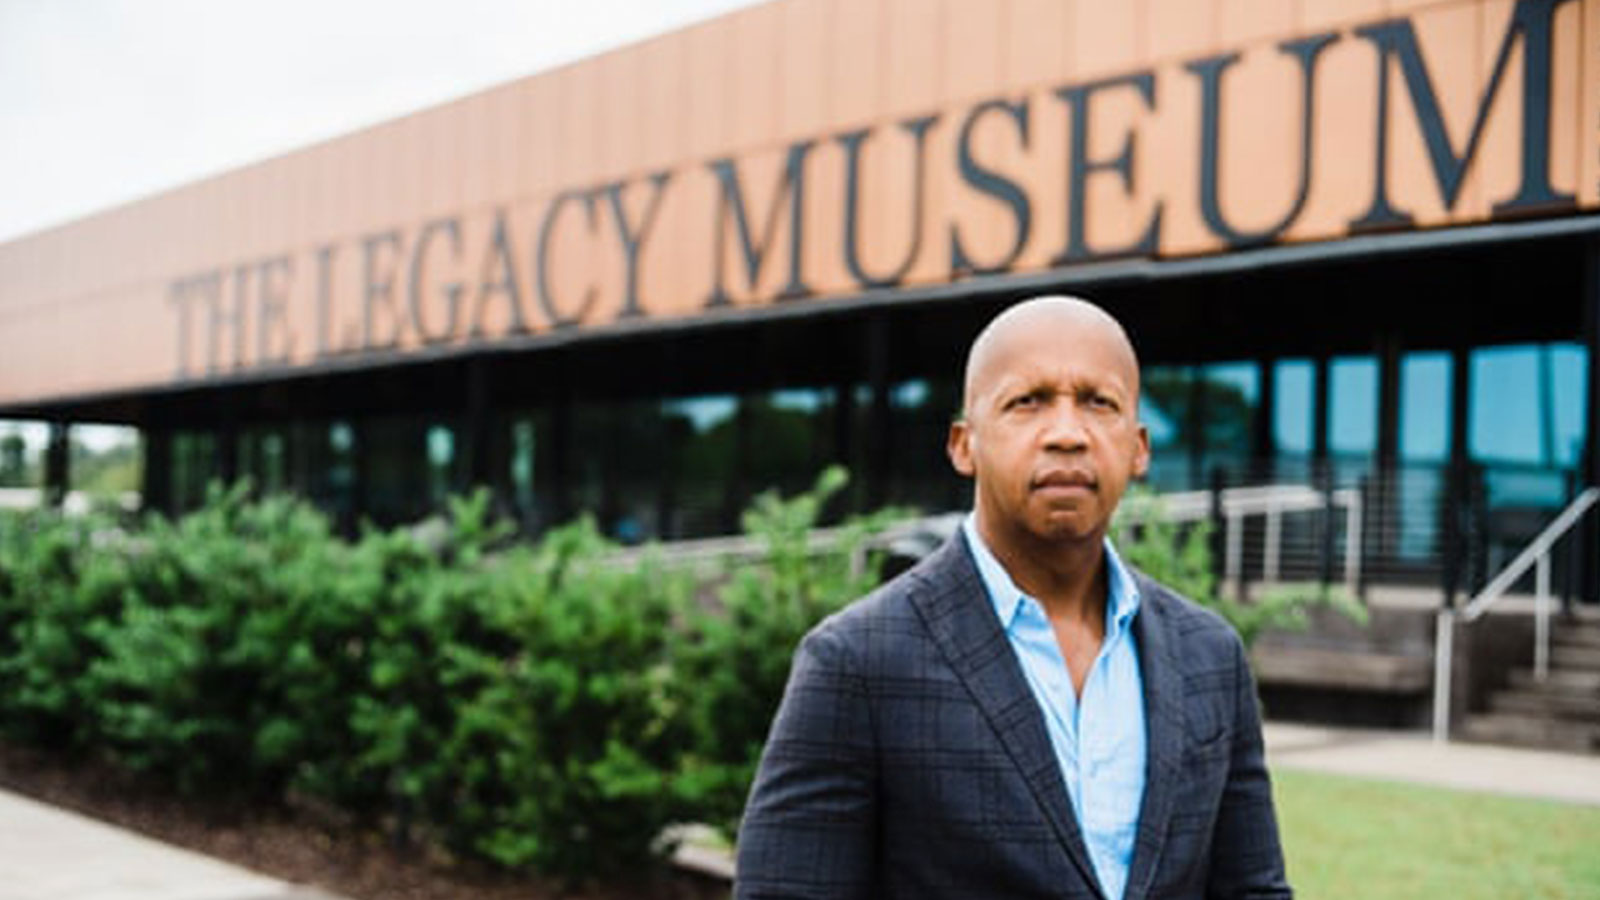 Bryan Stevenson, founder and executive director of the Equal Justice Initiative, stands outside The Legacy Museum. 